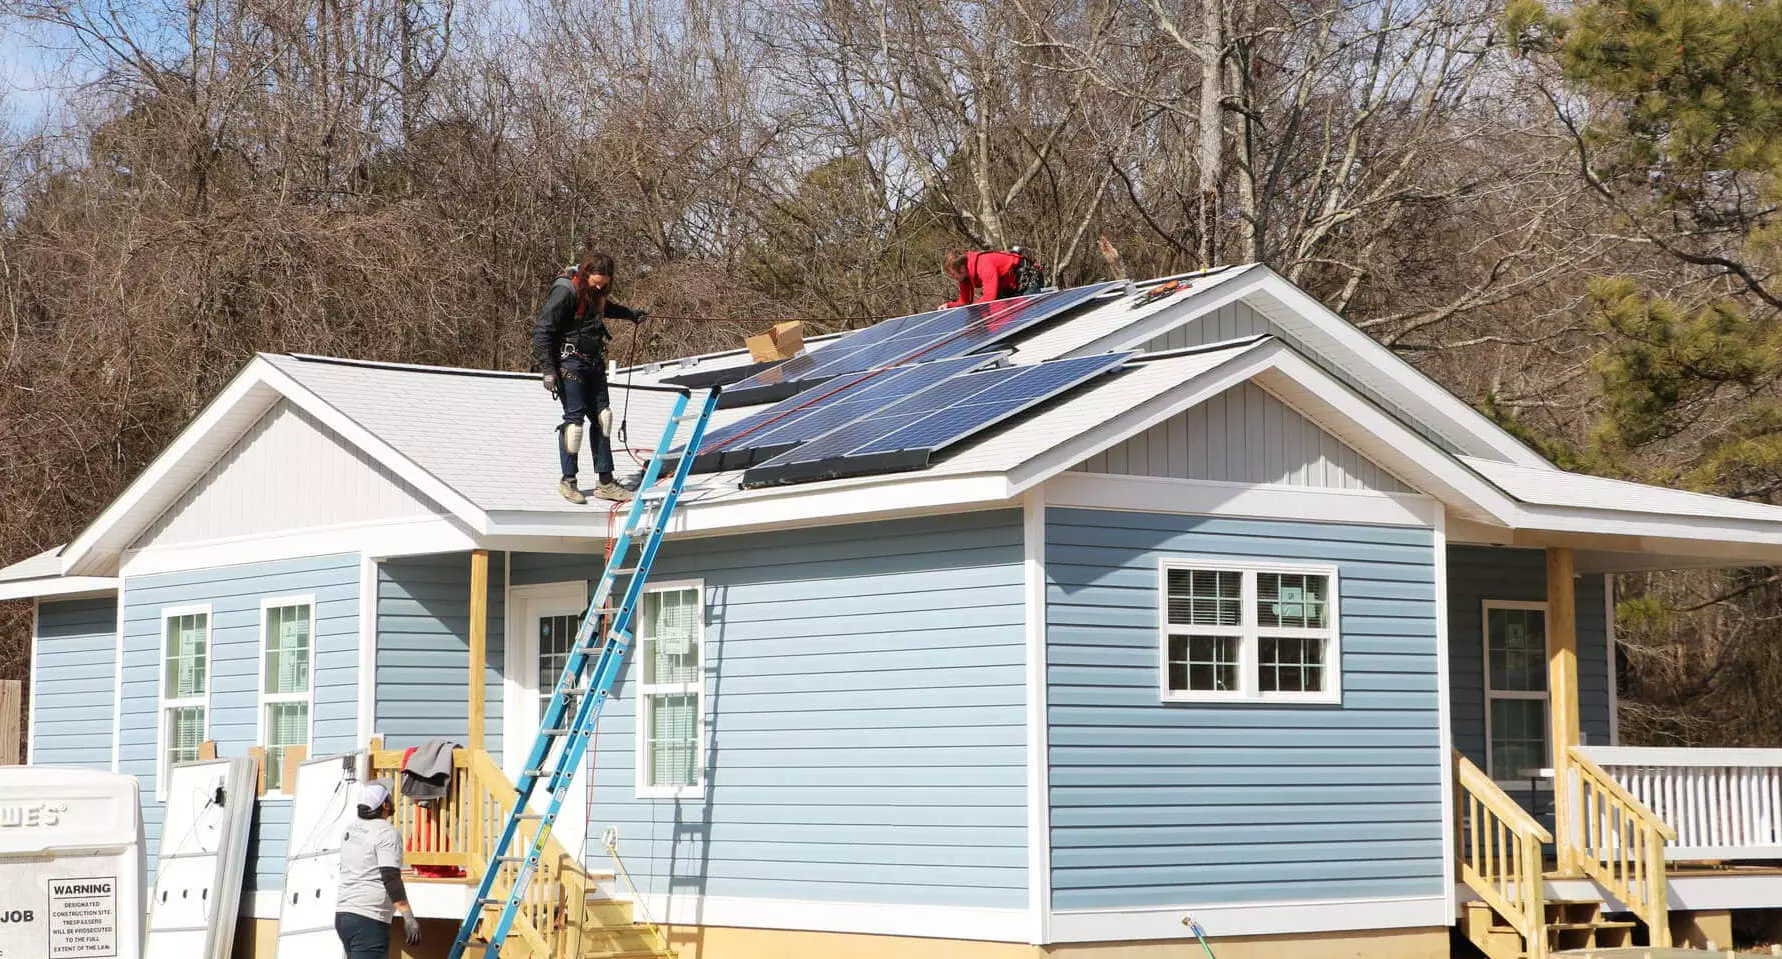 Blue Habitat for Humanity home with solar system installed on the roof